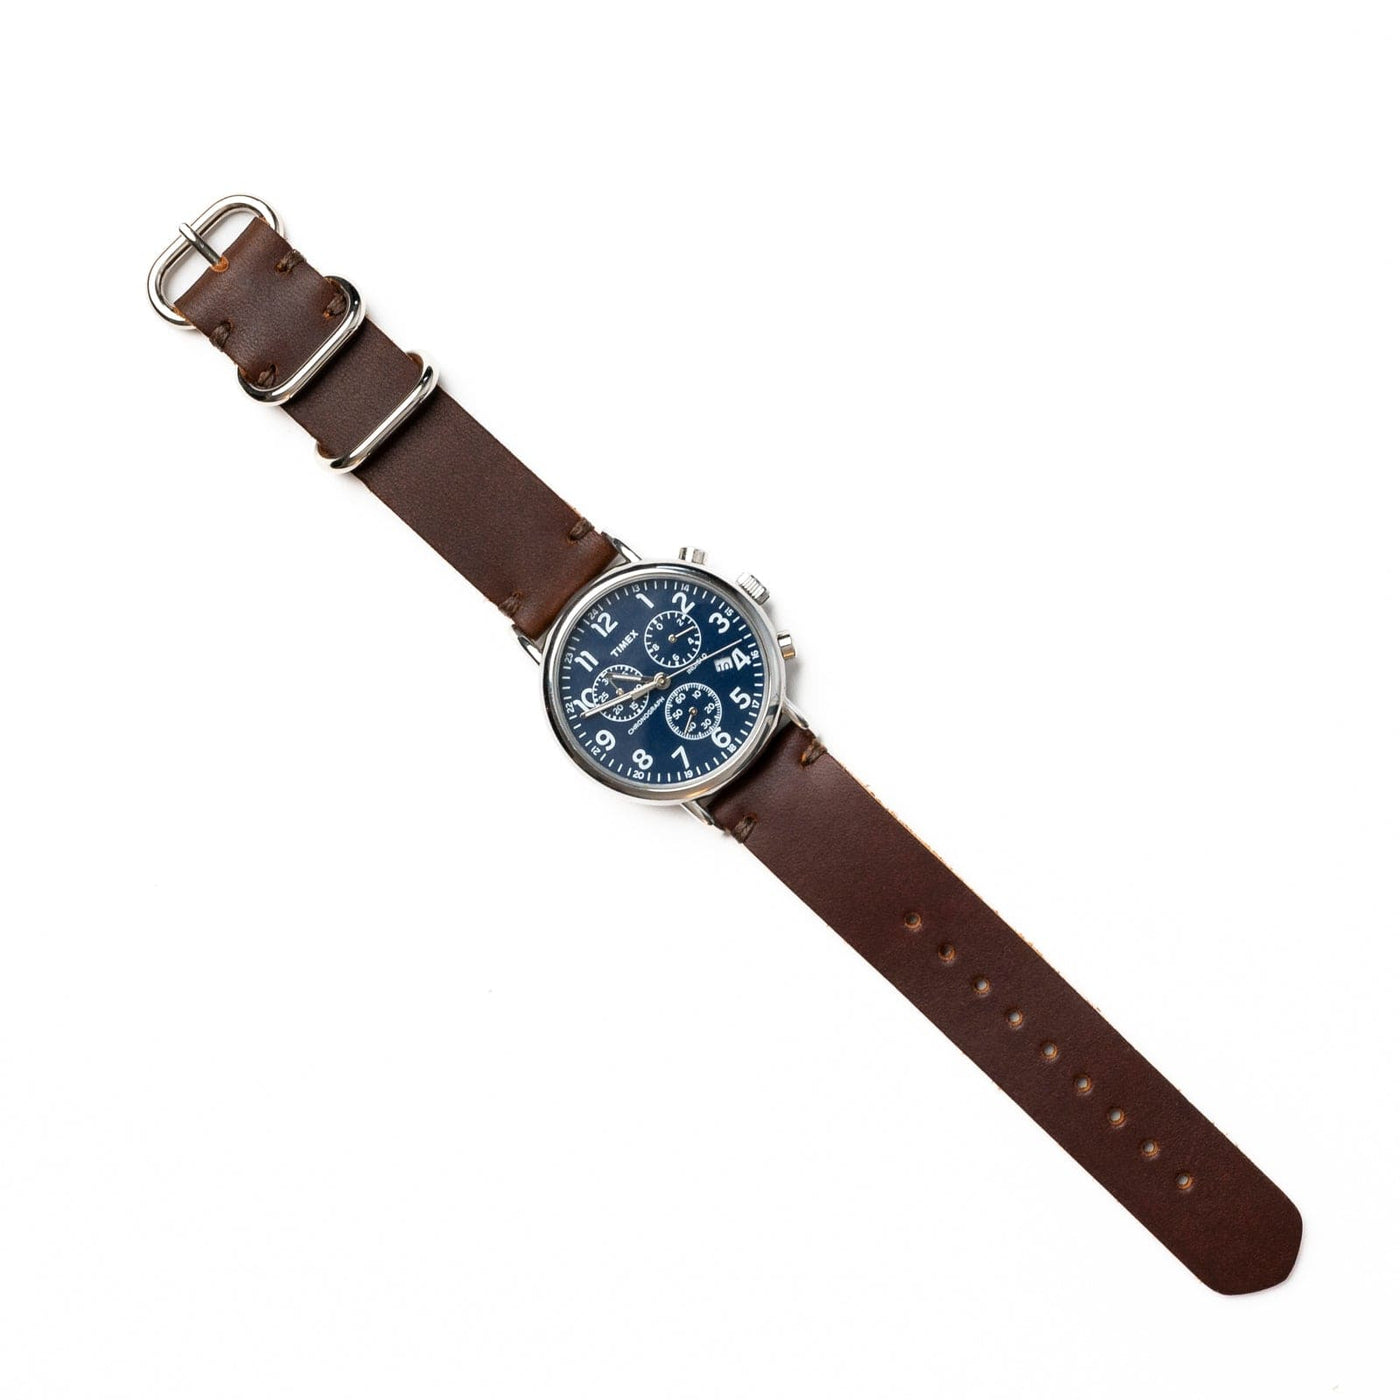 Leather Watch Band - Heritage Brown Popov Leather